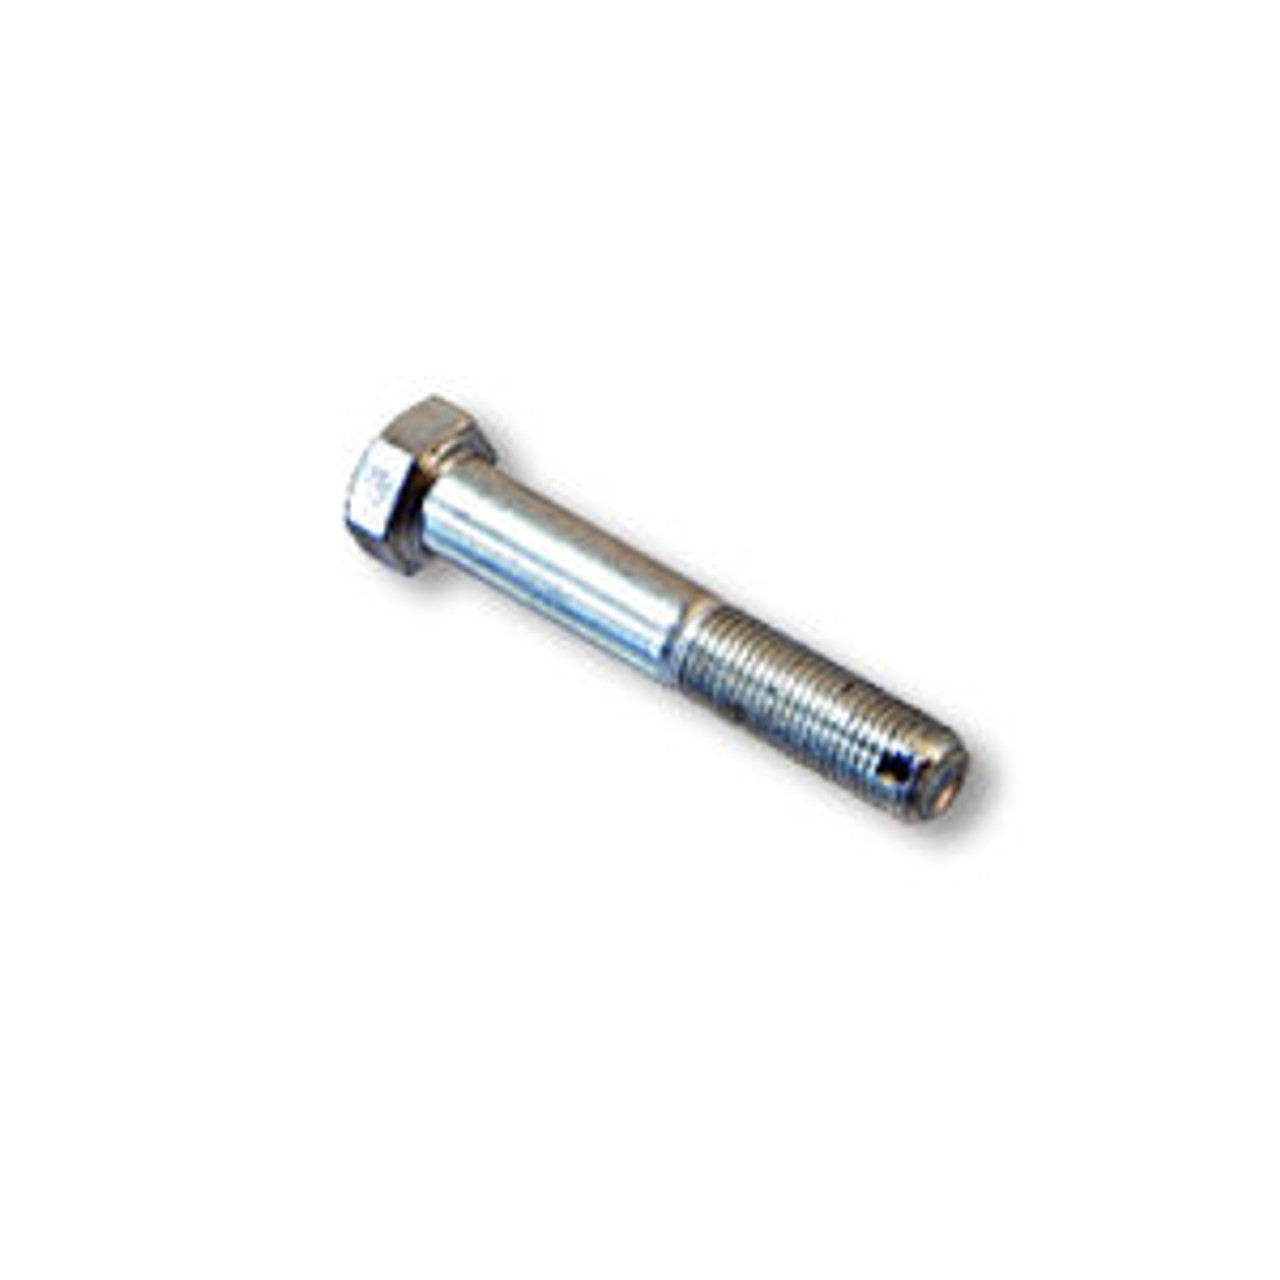 Bolt - 5/16-24 X 2-1/4", 1/16" Hole Drilled 3/32" From End, Zinc Plated